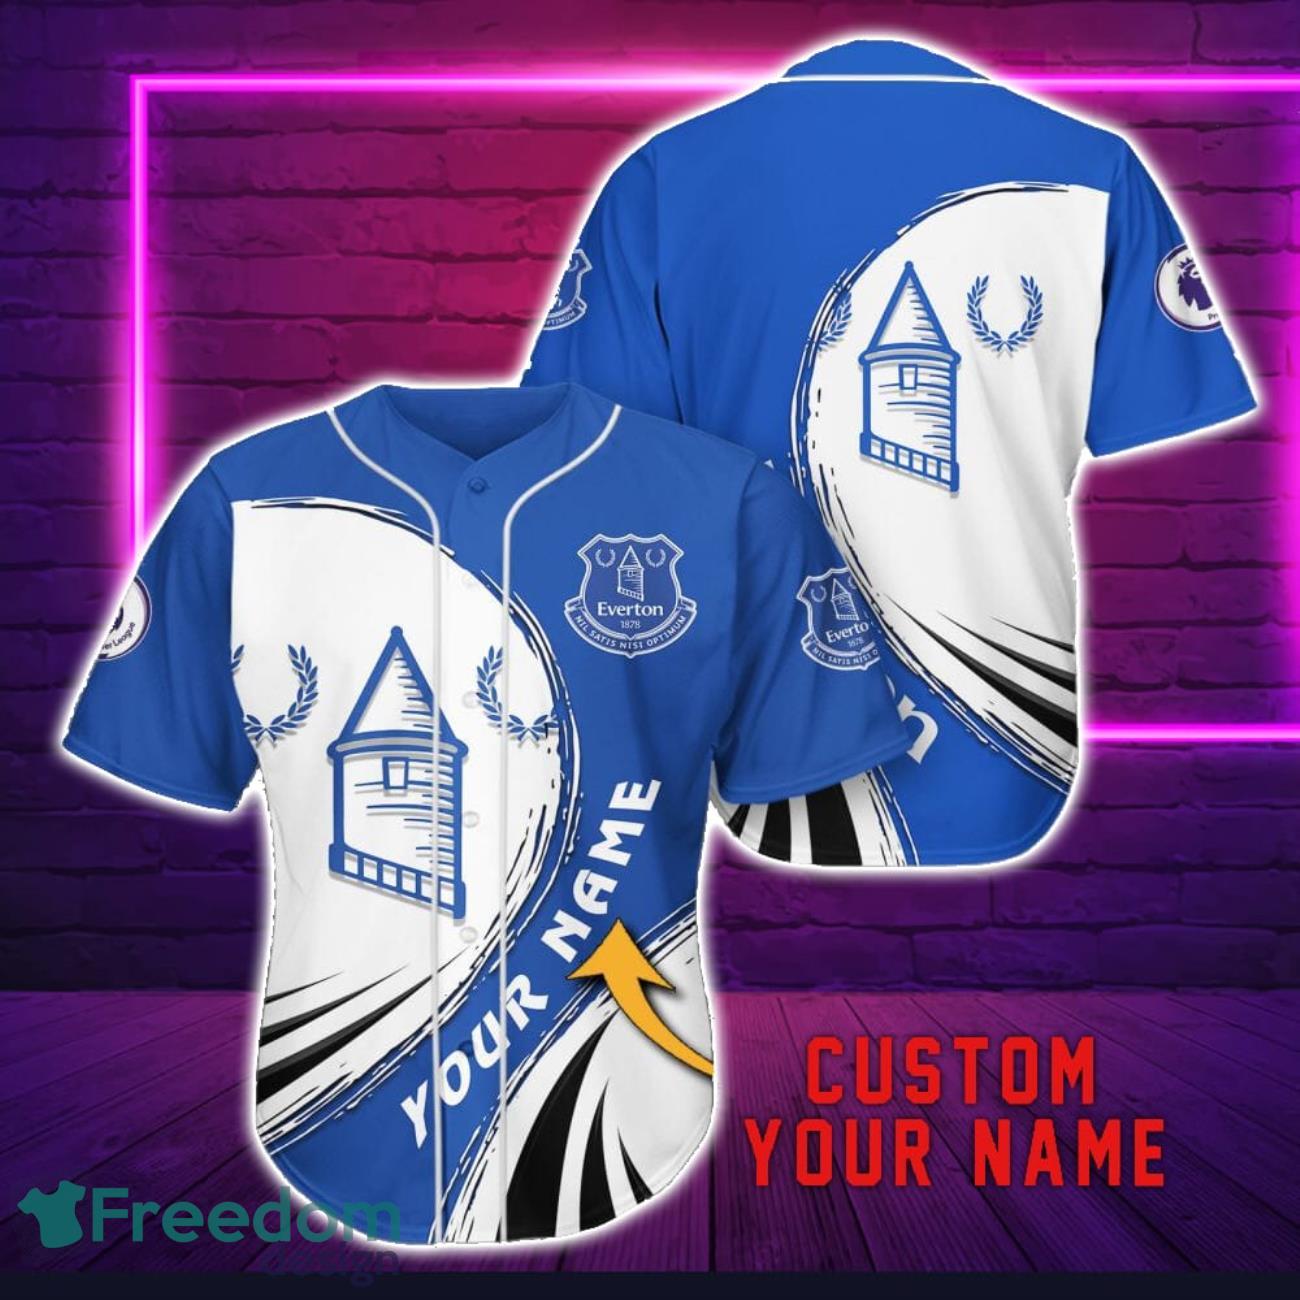 Everton Personalized Home Jersey